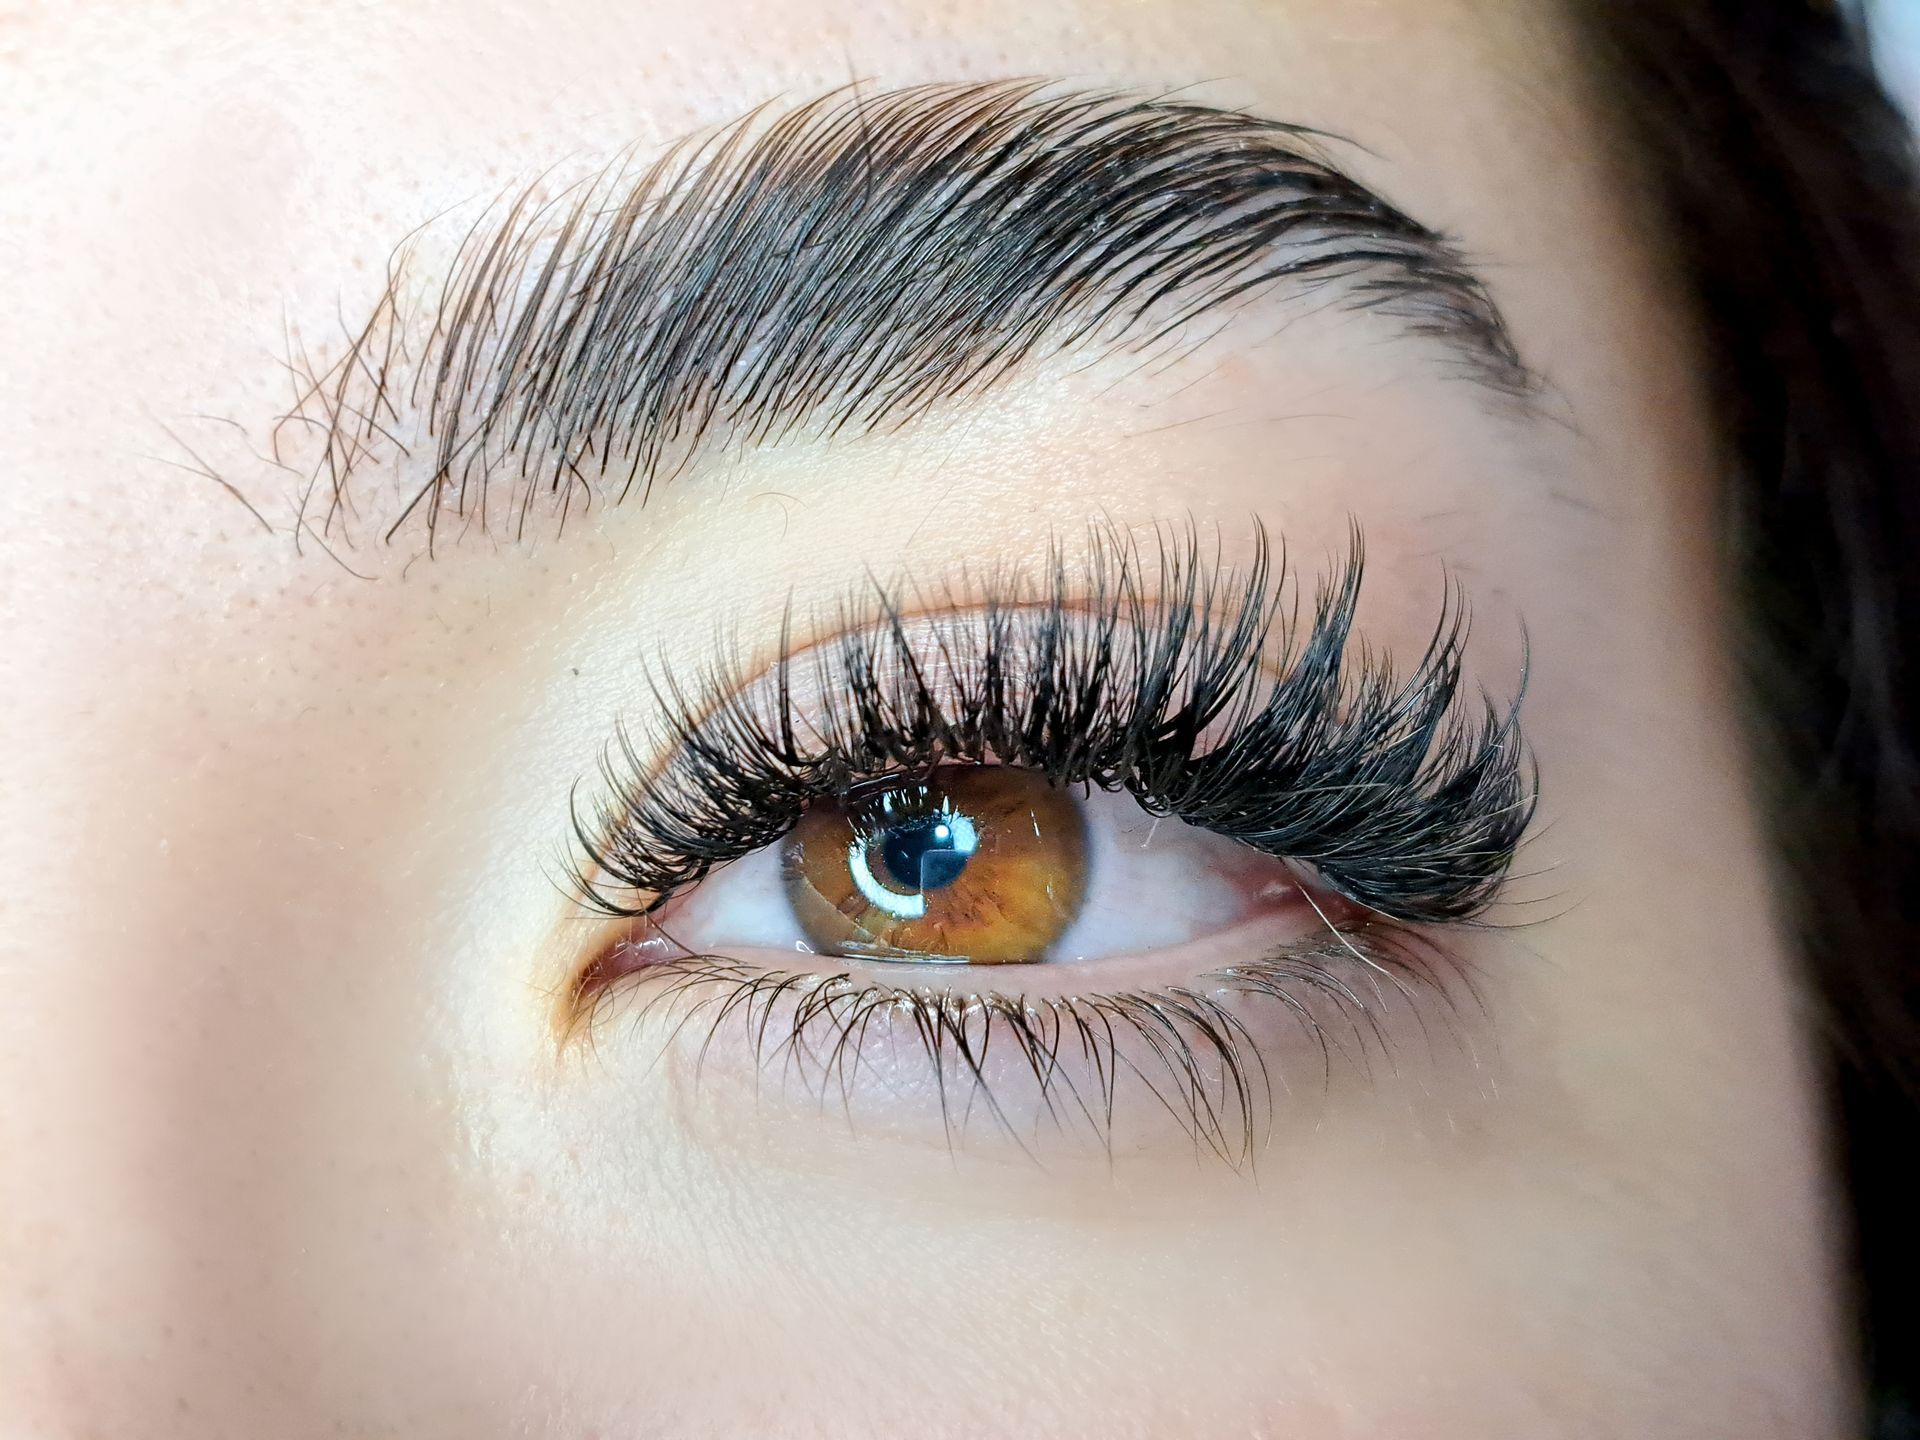 A close up of a woman 's eye with long eyelashes.